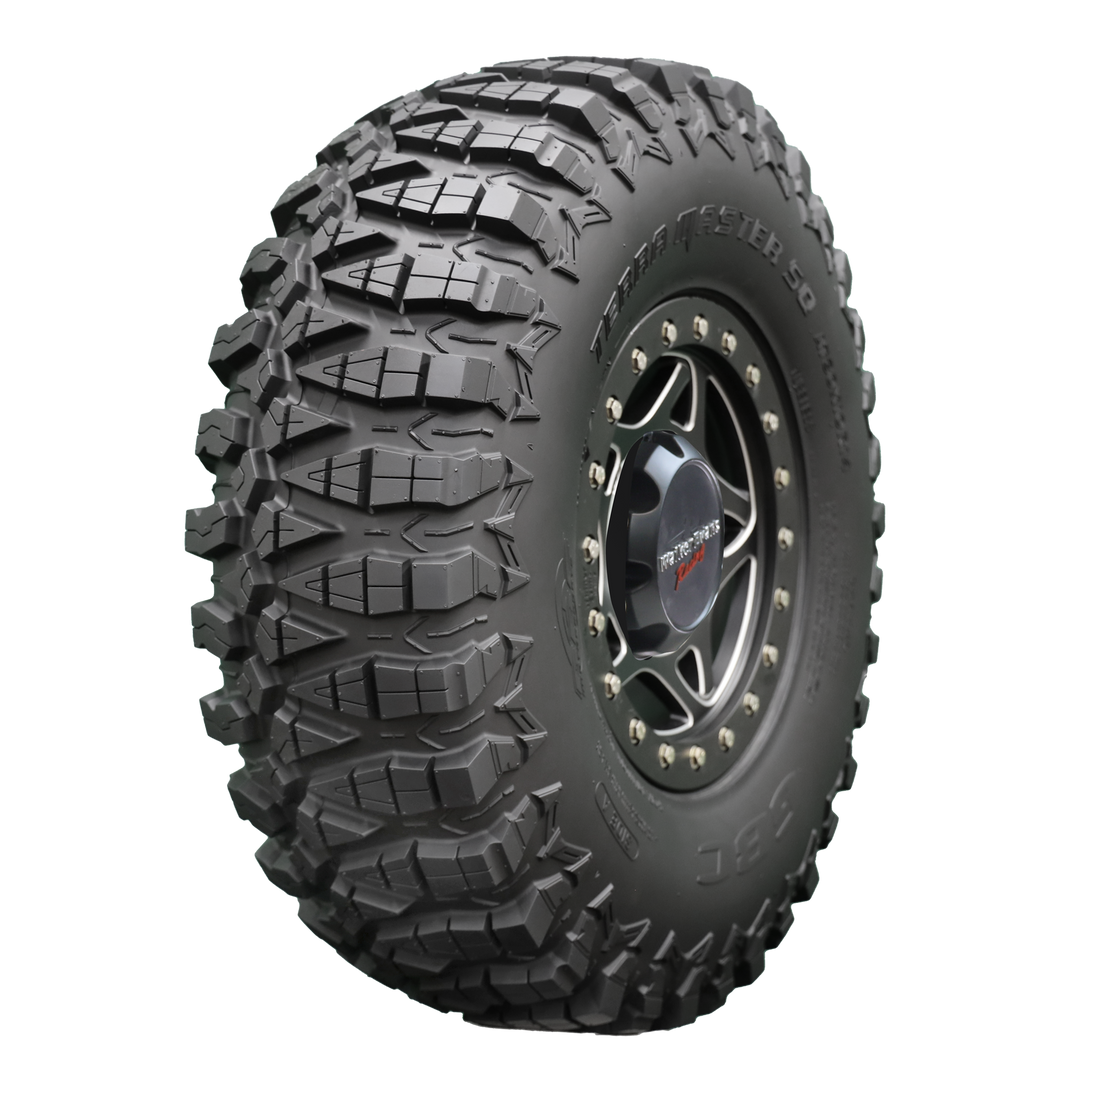 Angle view of Terra Master SQ UTV tire, showcasing the tread, a section of the sidewall, and the rim. The image emphasizes the tire's advanced square shoulder design for a bold new profile, offering a distinct look compared to the original Terra Master. Its side bite design promises greater control during cornering